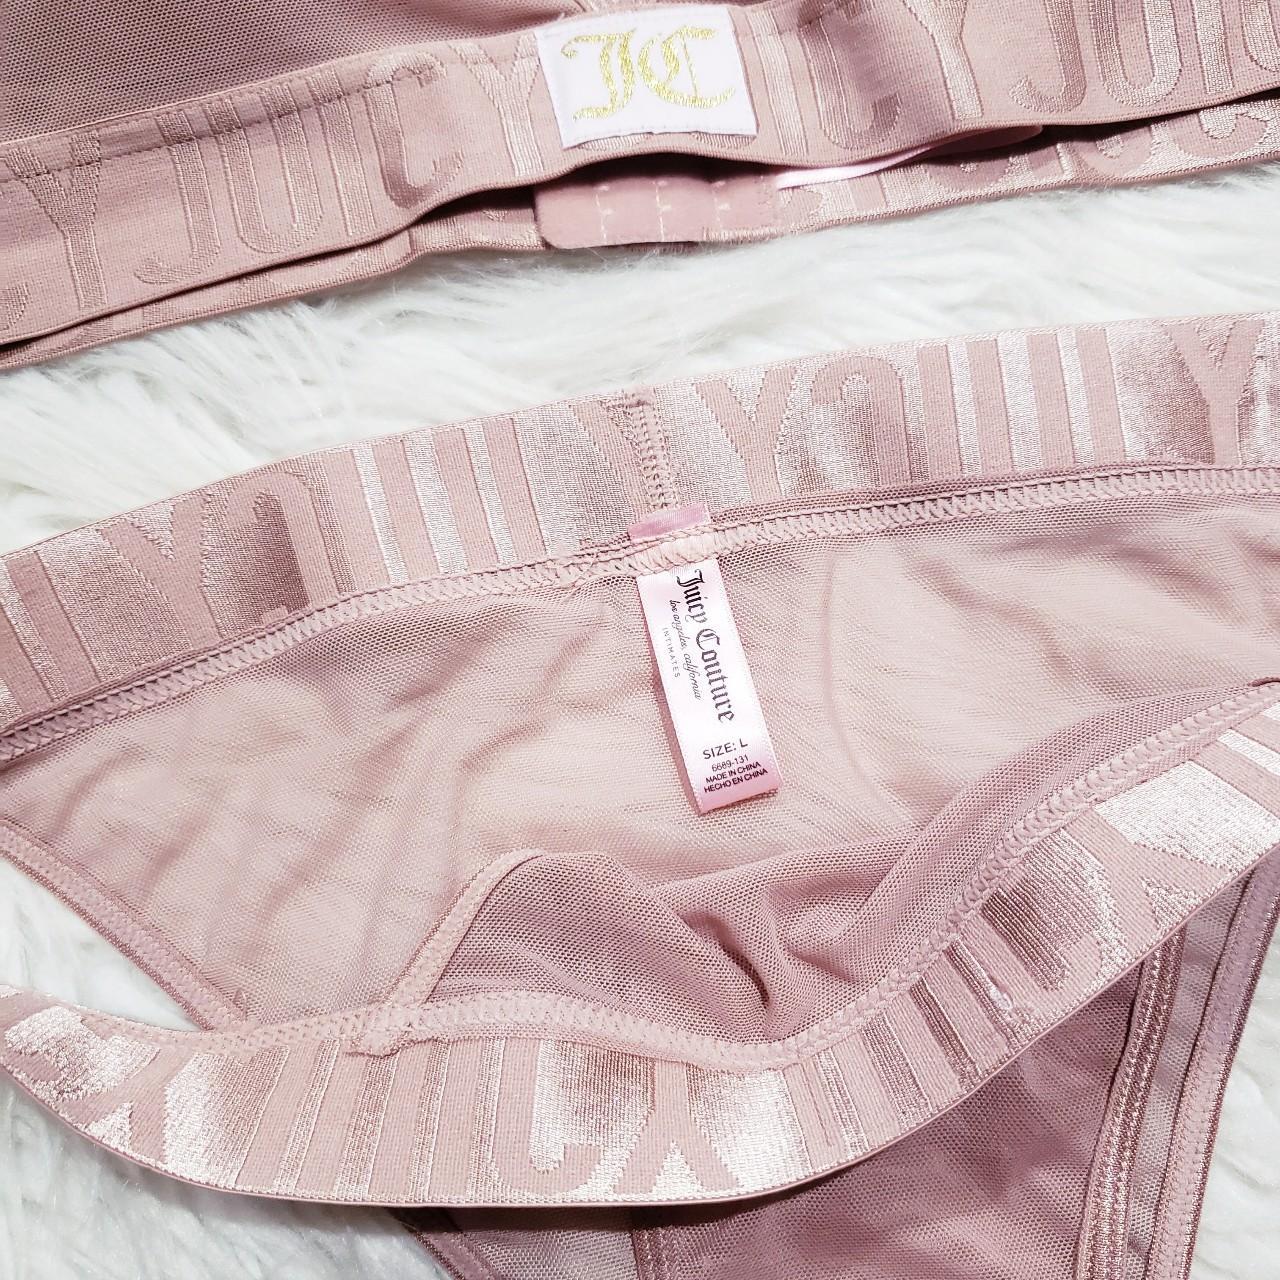 Juicy Couture Intimates Bra and Shorts Set, Size L